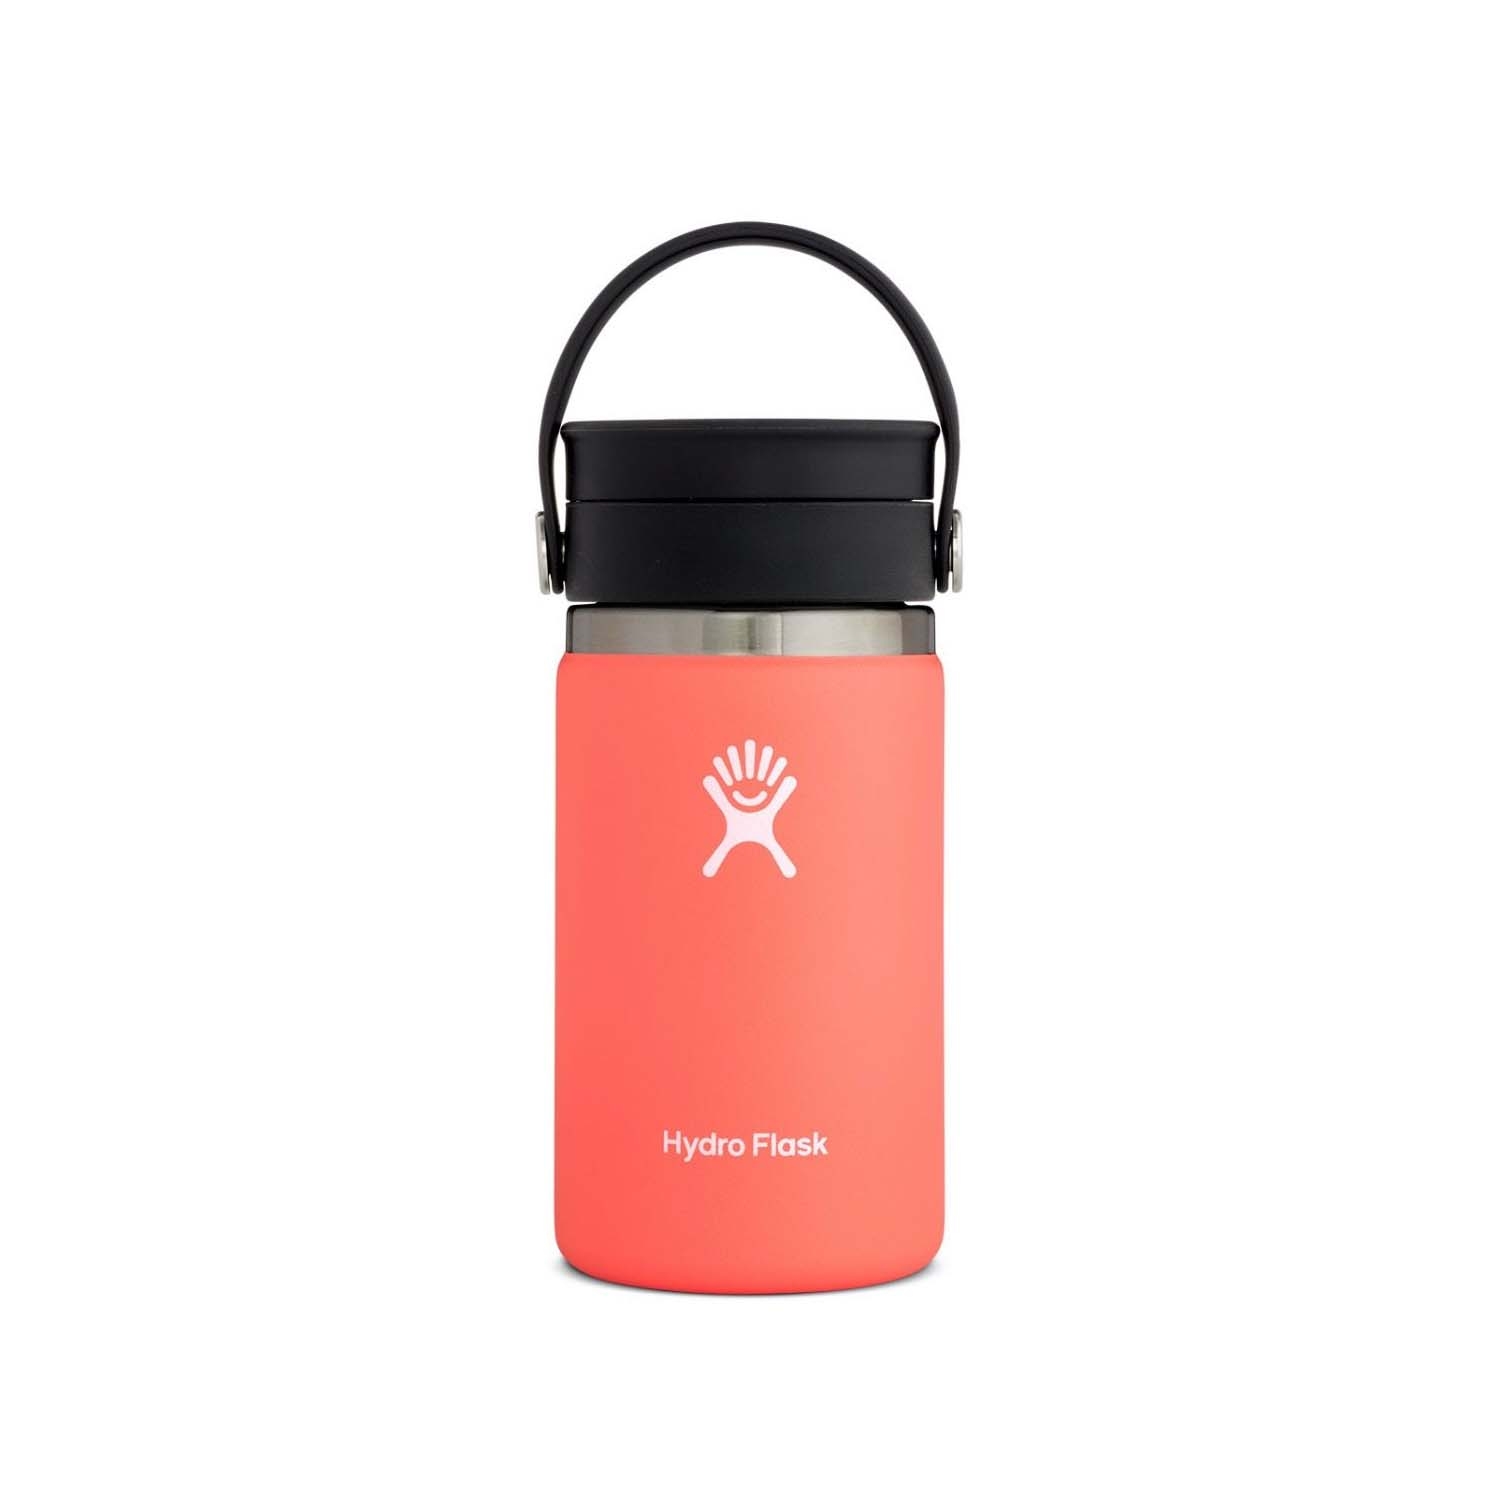 Hydro Flask 12oz Wide Mouth Coffee Flask with Flex Sip Lid Hibiscus